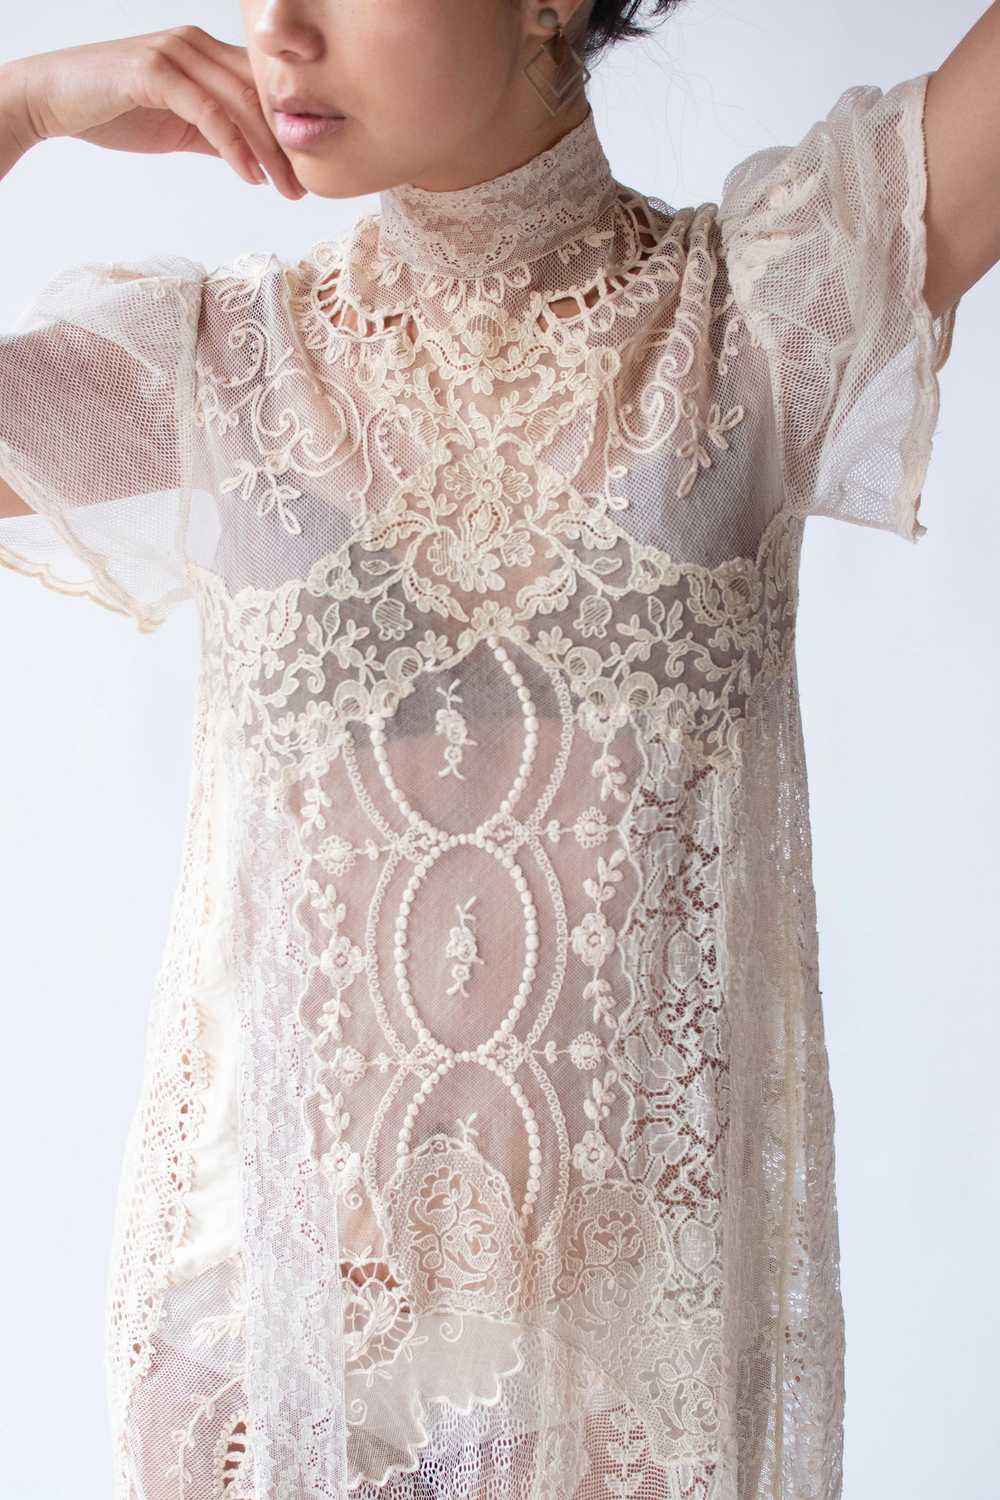 1980s Lace Works Dress - image 5